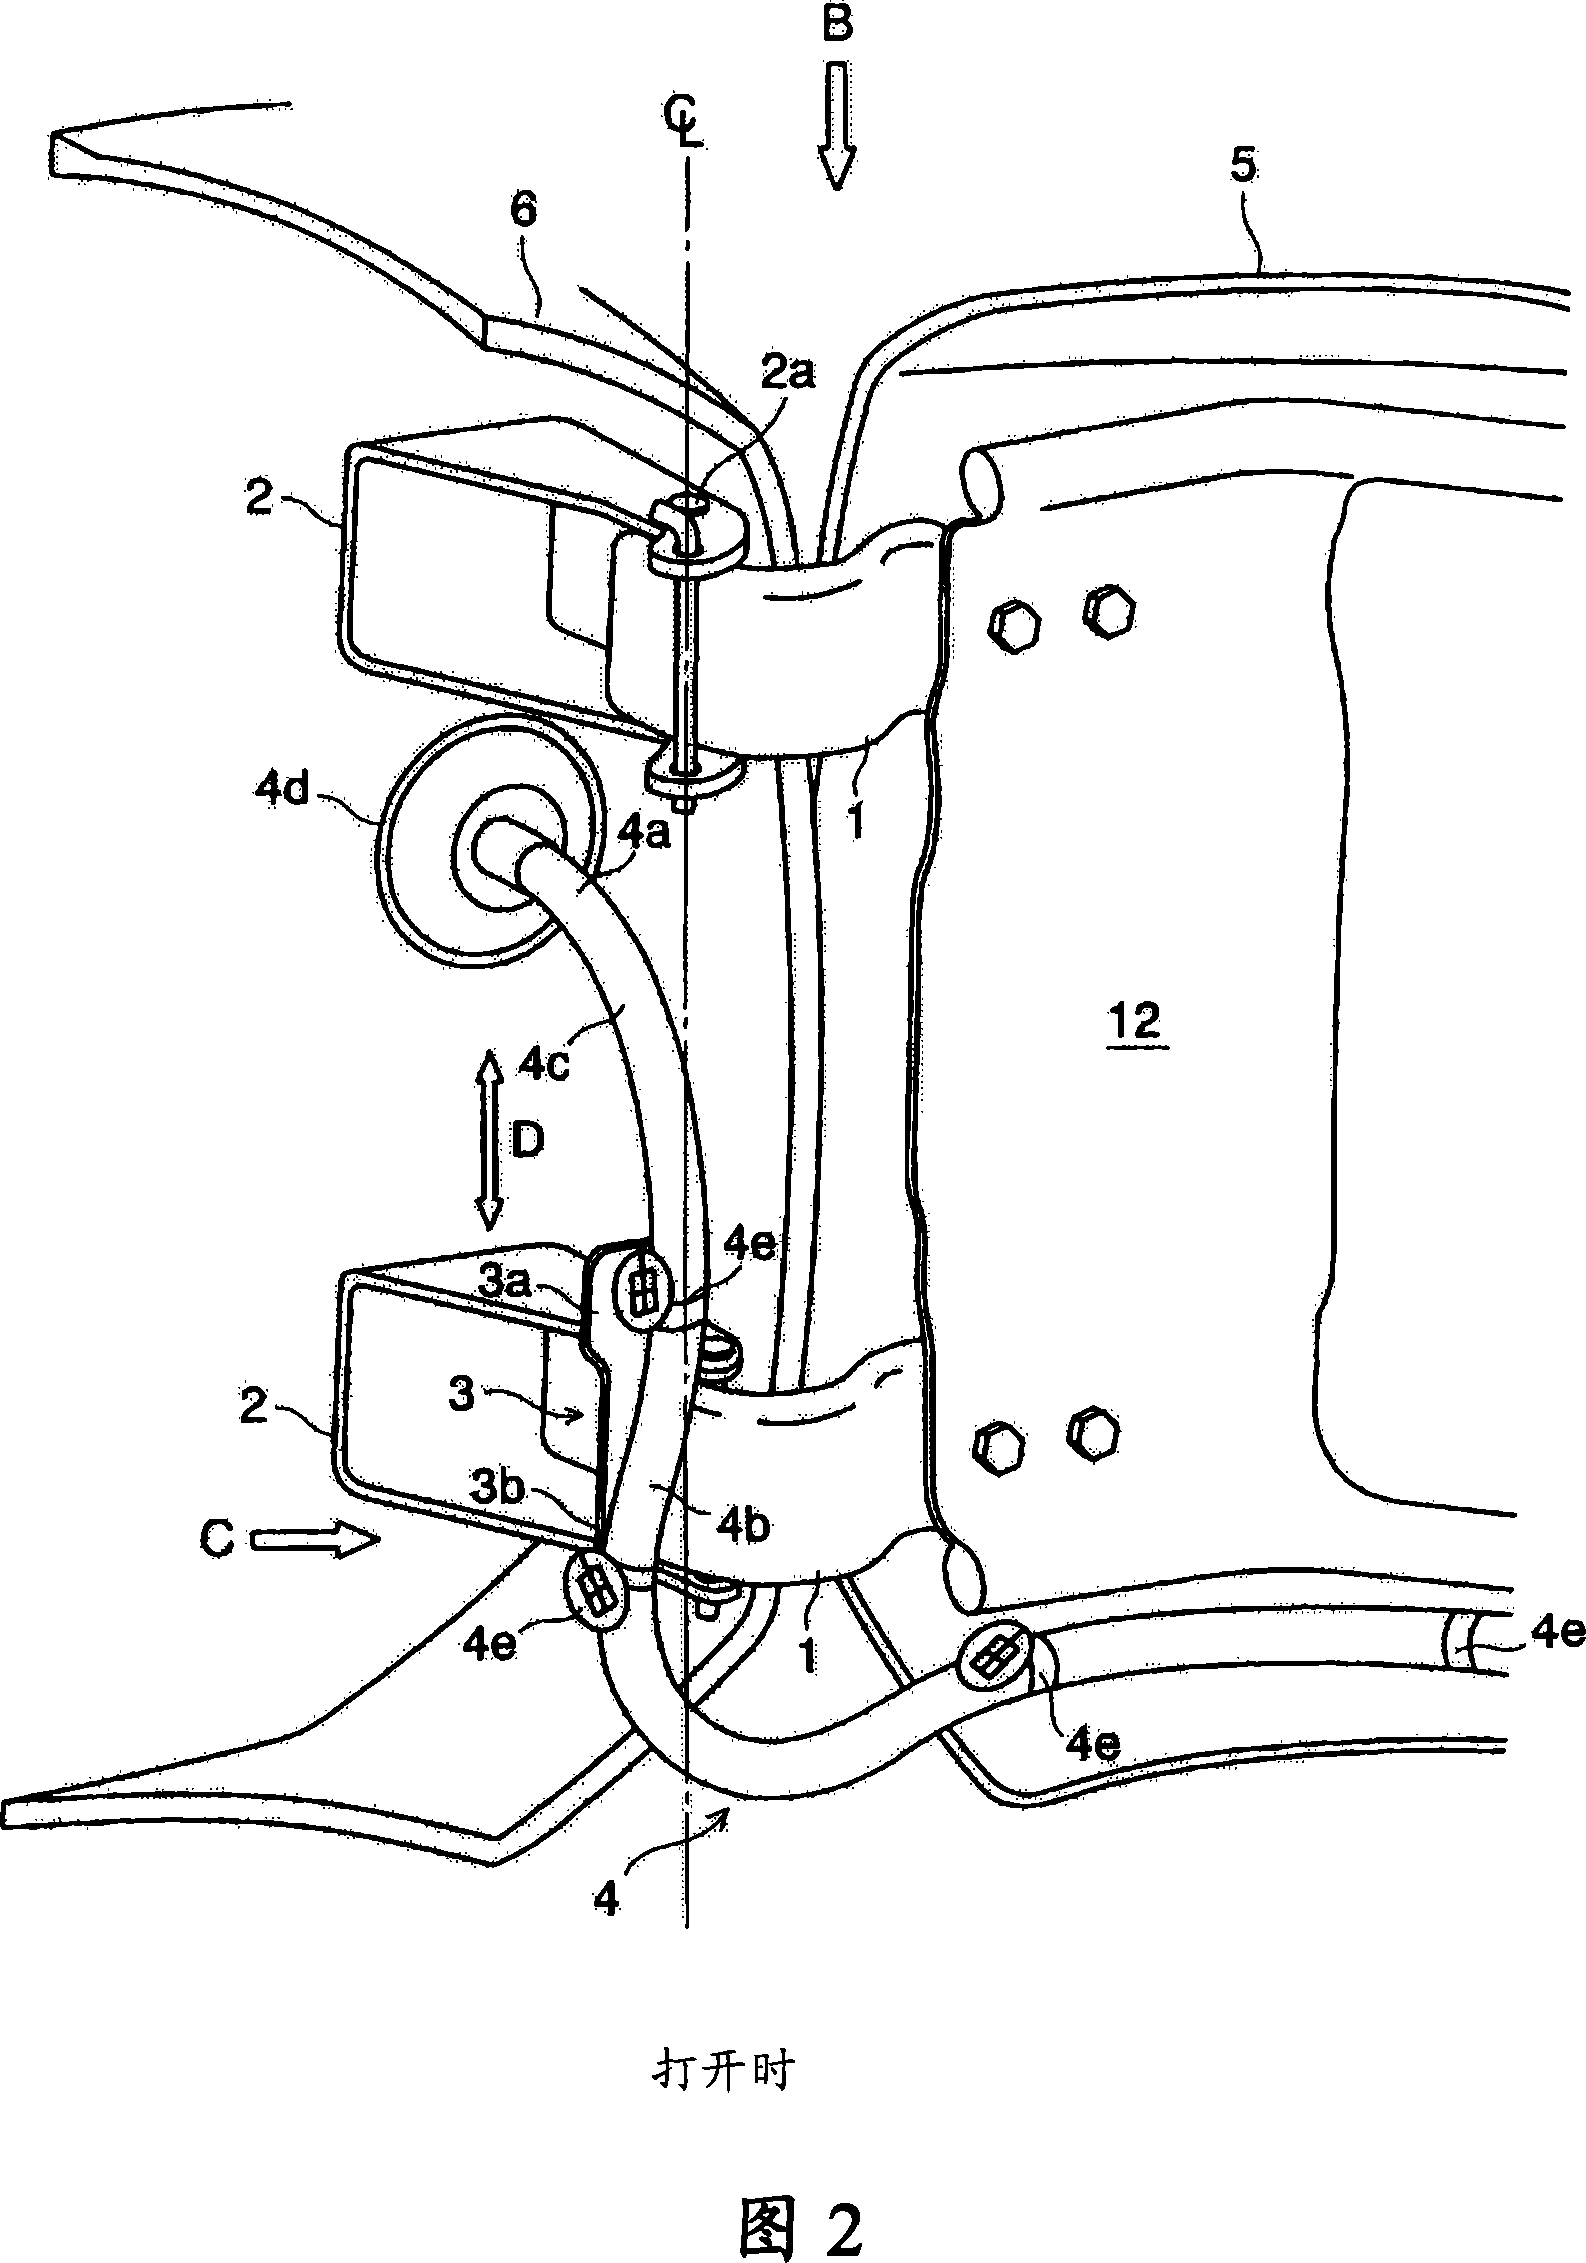 Open close structure of vehicle cover parts